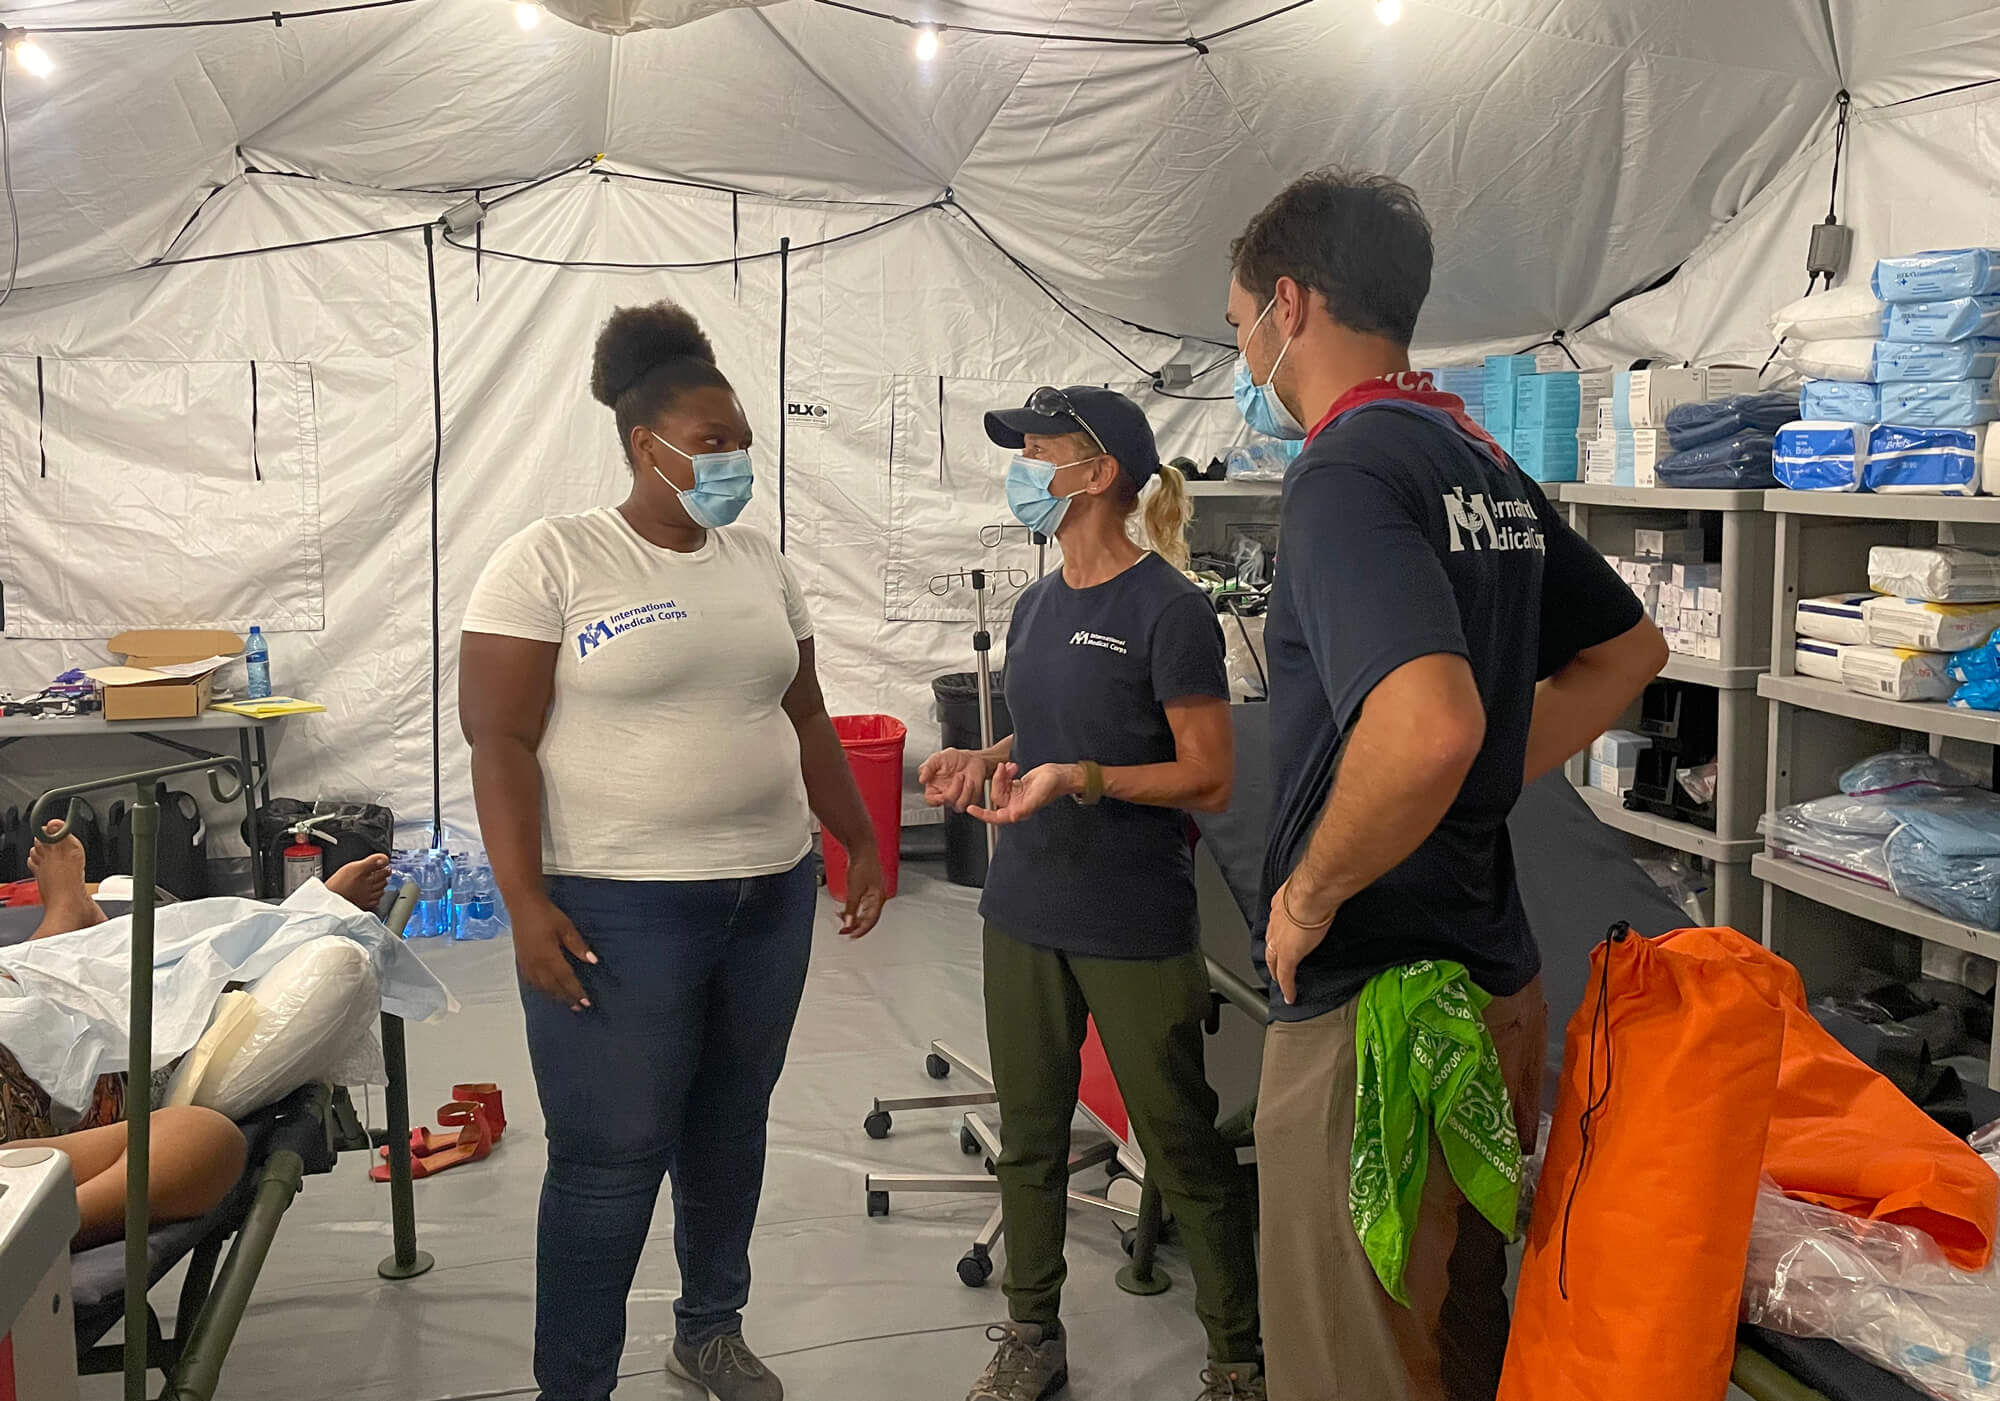 Dr. John Roberts (right) speaks with fellow team members Sue Mangicaro and Vanessa Delone Jean Louis inside the International Medical Corps field hospital in Haiti.